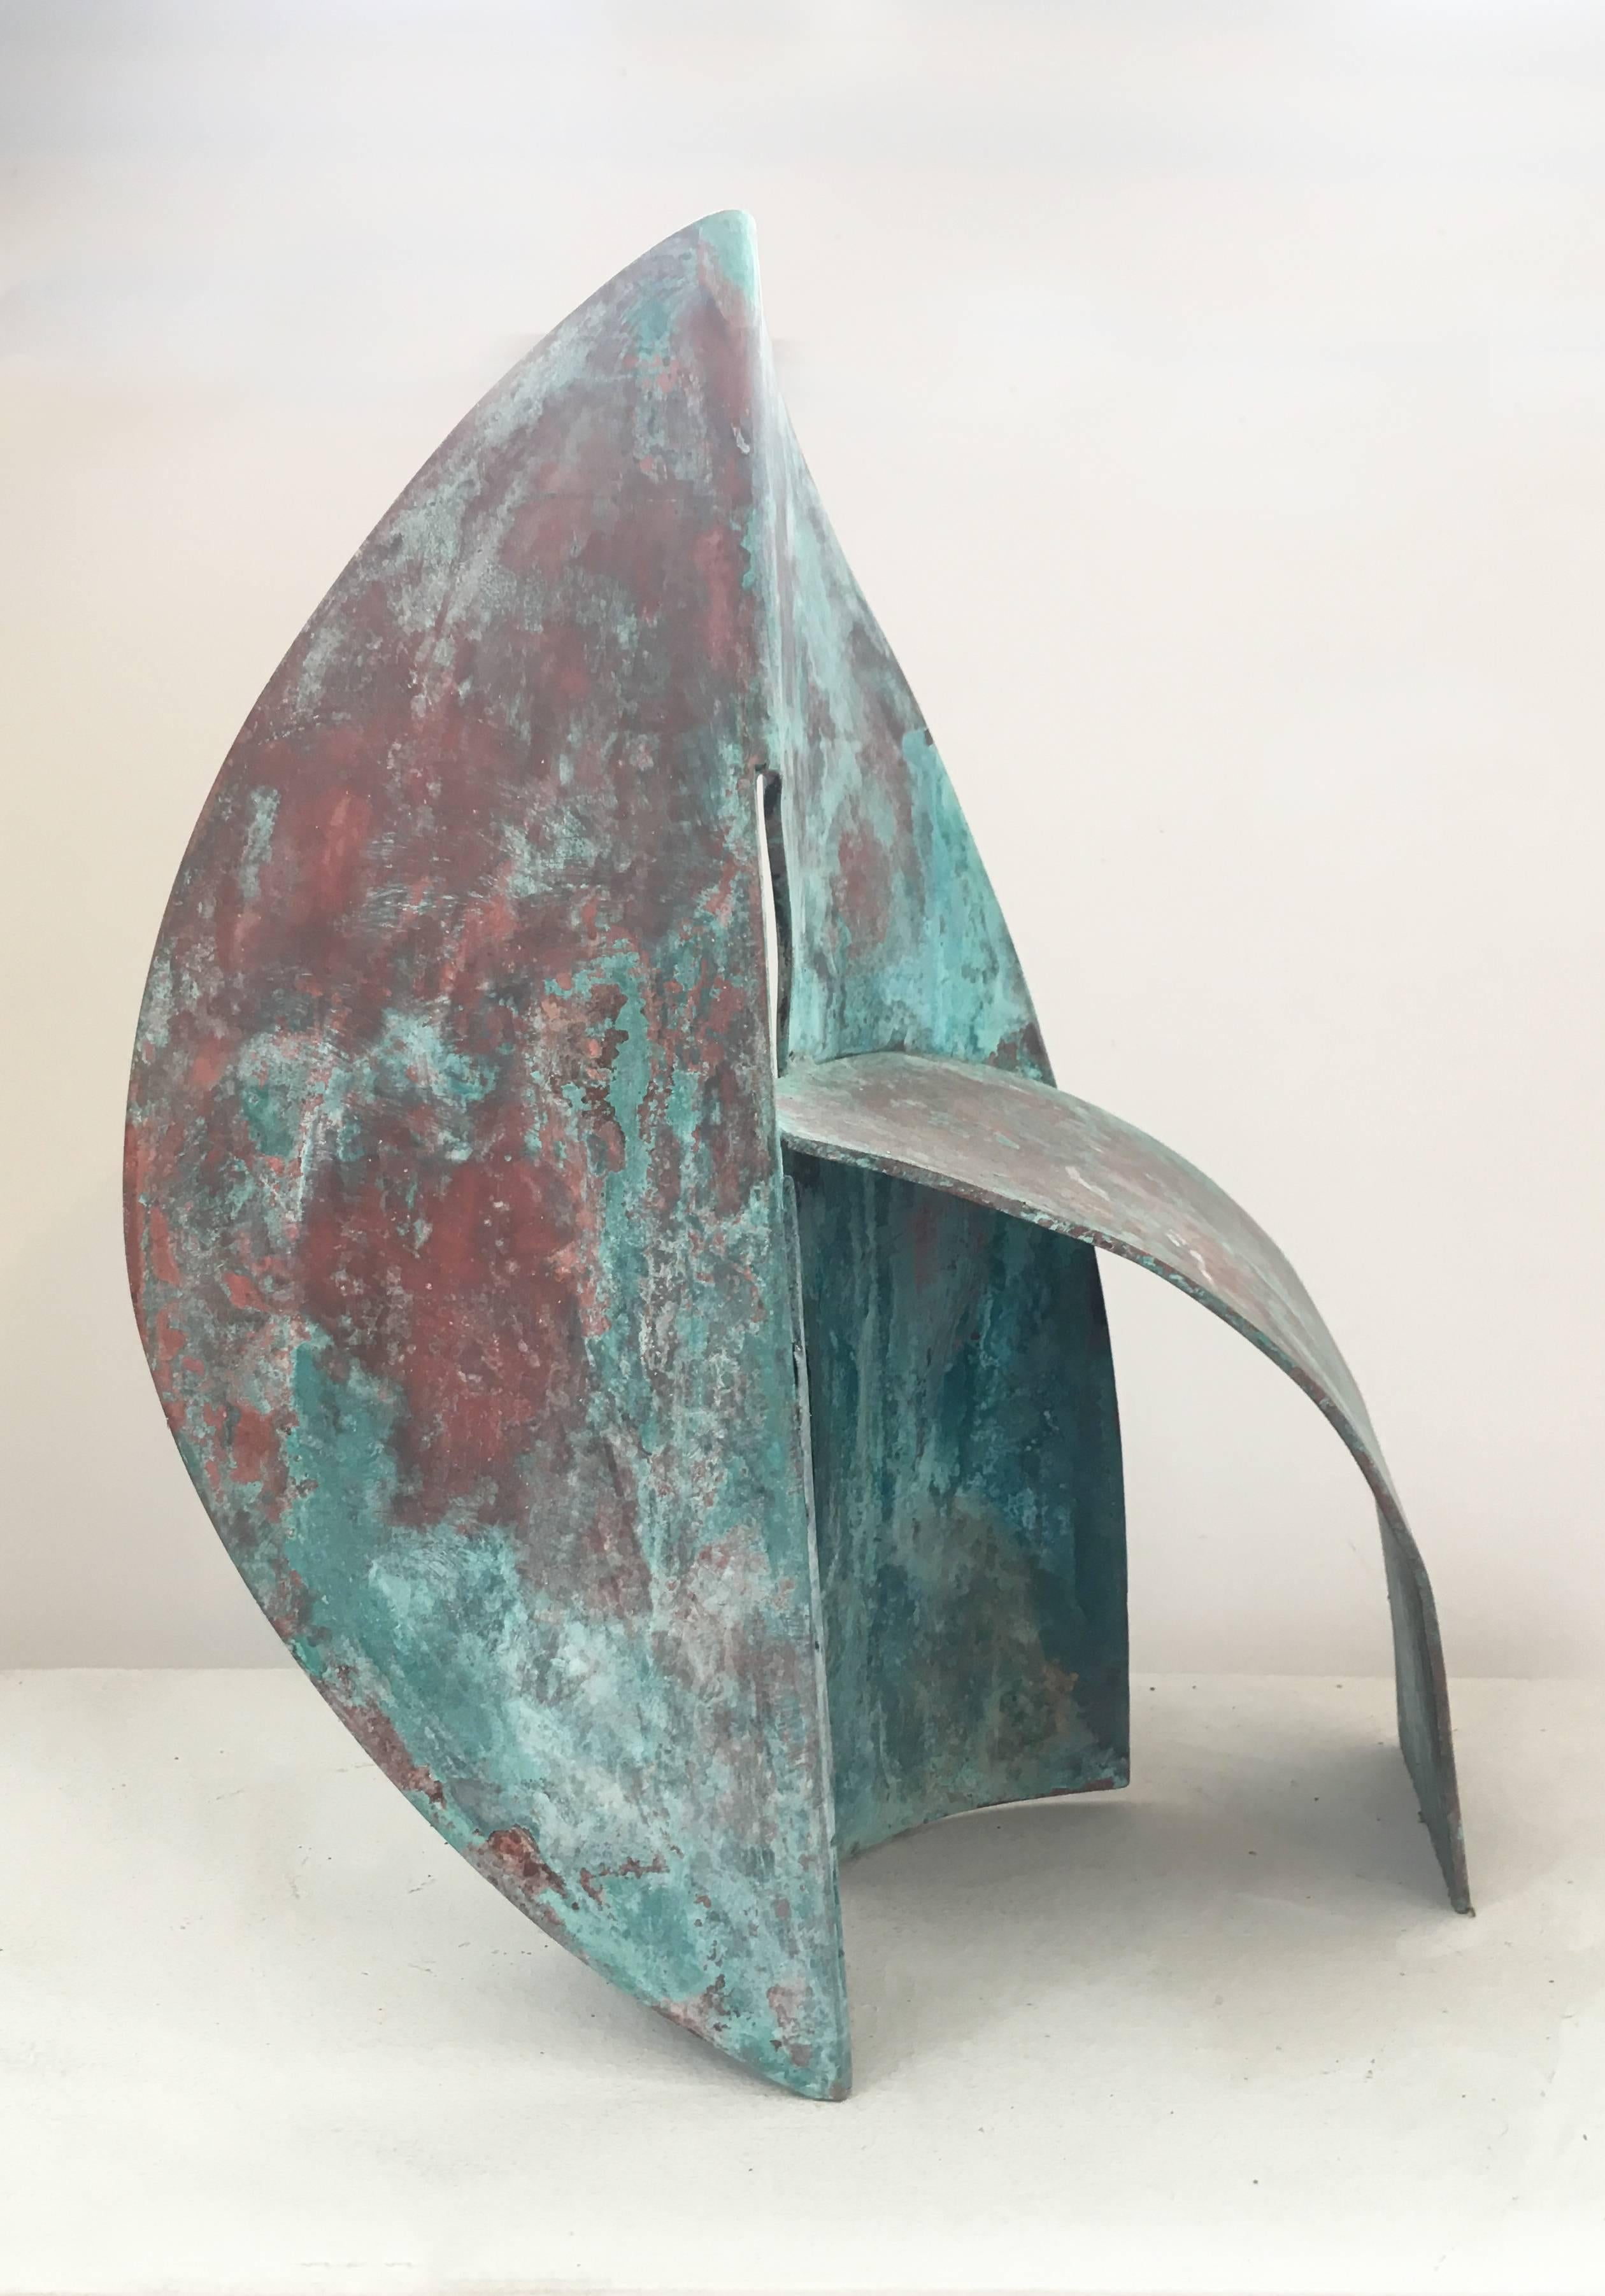 Atlantis II (Abstract Mid Century Modern Sculpture in Teal Patinated Brass) - Gray Abstract Sculpture by Leon Smith